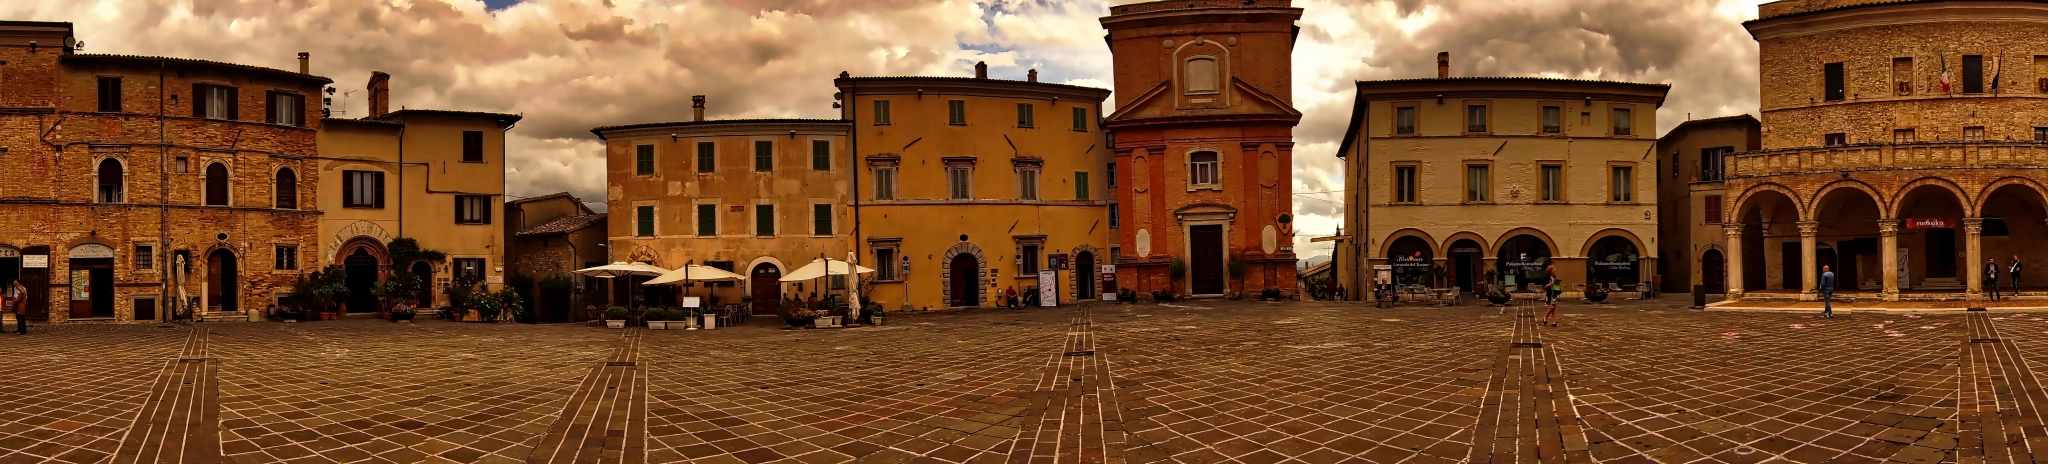 Sony SLT-A65 (SLT-A65V) sample photo. Montefalco - the town square photography